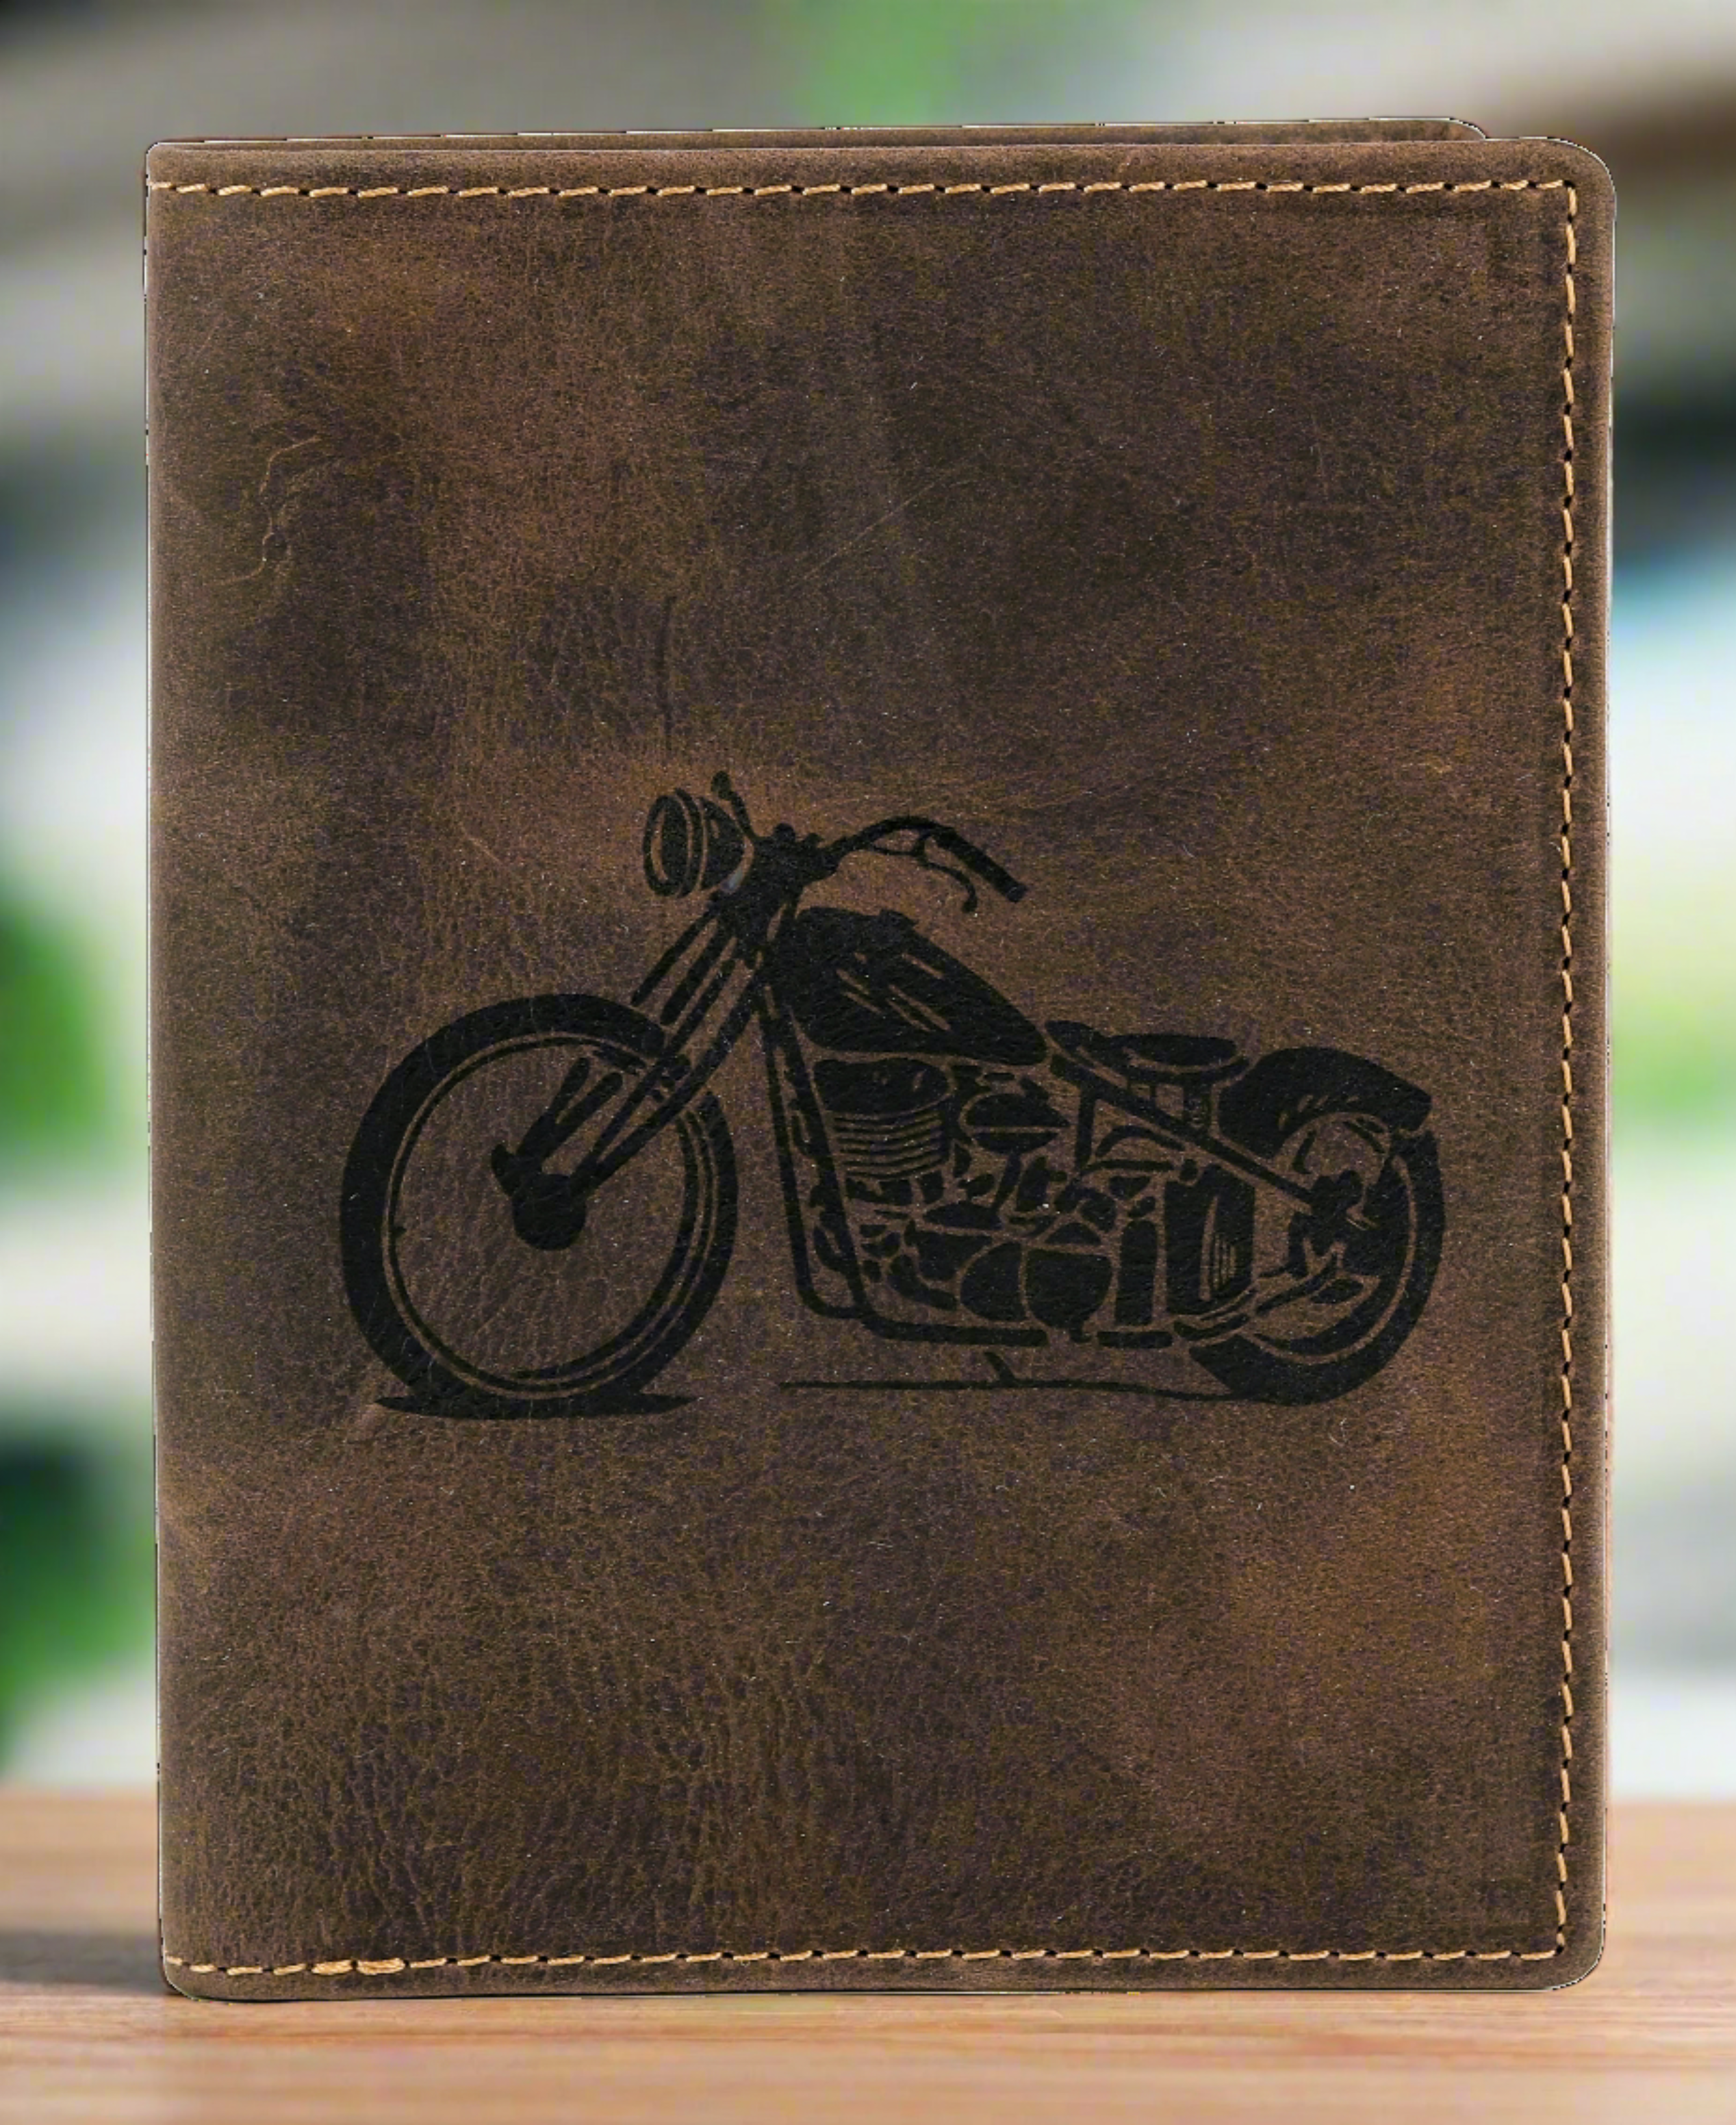 BOL/Open Road Men's Motorycle Distressed Leather Wallet